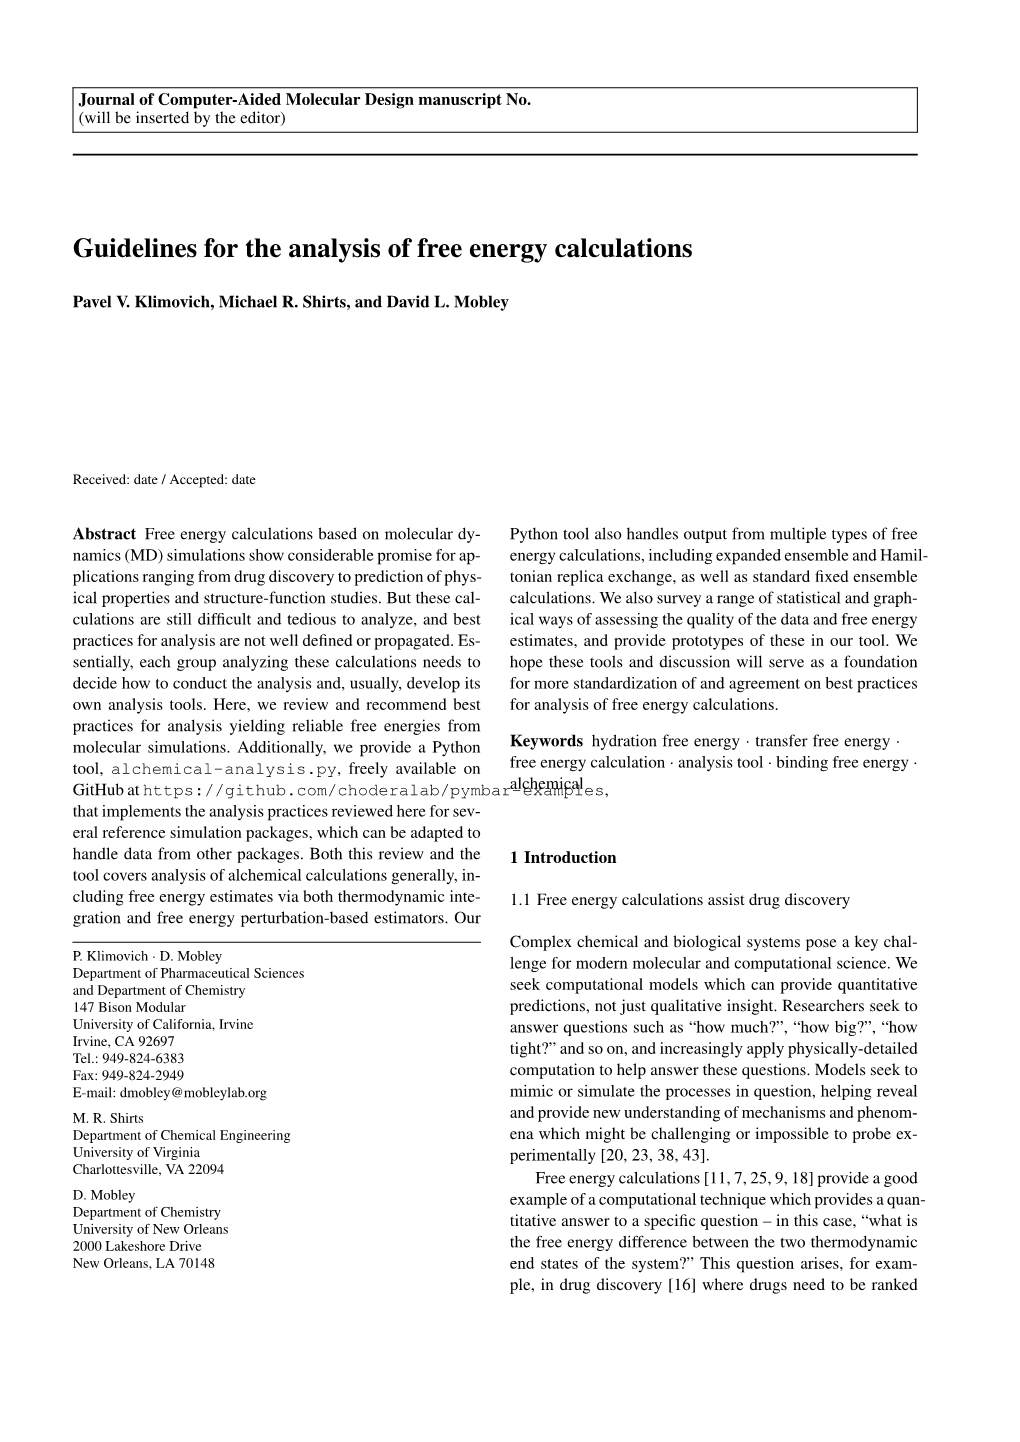 Guidelines for the Analysis of Free Energy Calculations